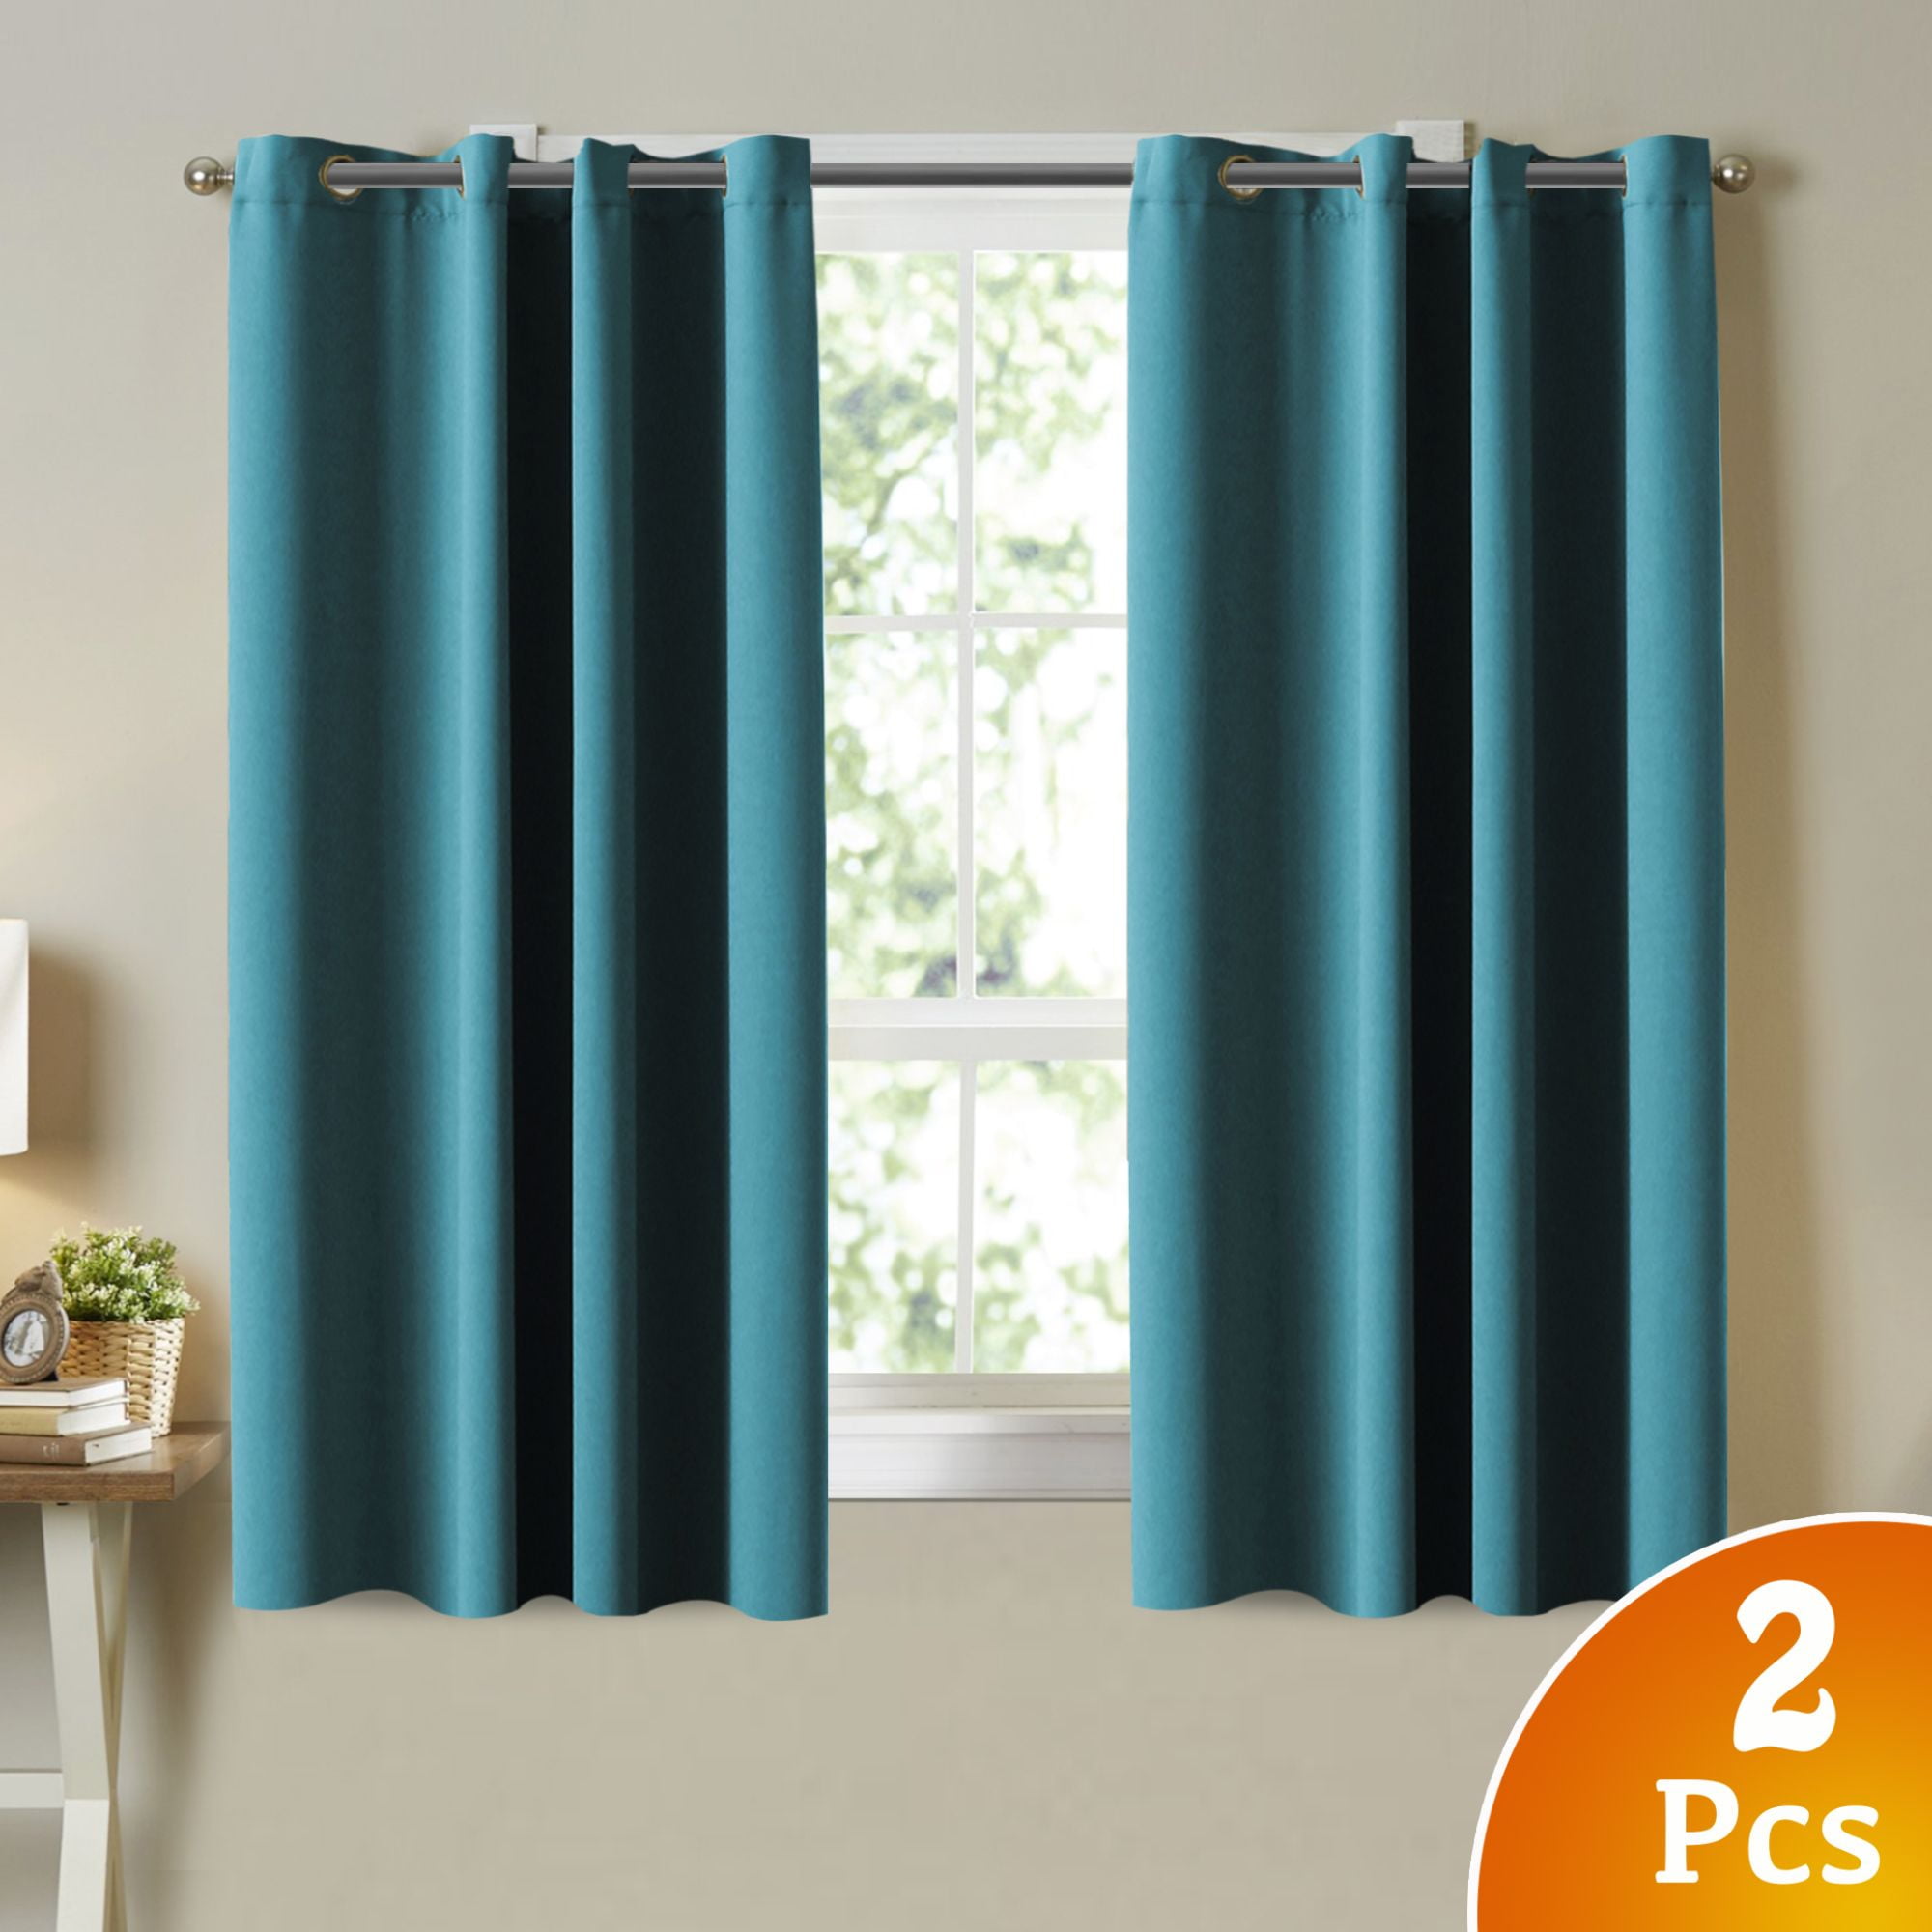 Thermal Insulated Grommet Top Each 52 by 63 Inch Sold Pair Turquoise Blue H.VERSAILTEX Blackout Curtains 2 Panels for Bedroom Light Blocking Room Darkening Curtain Drapes for Living Room